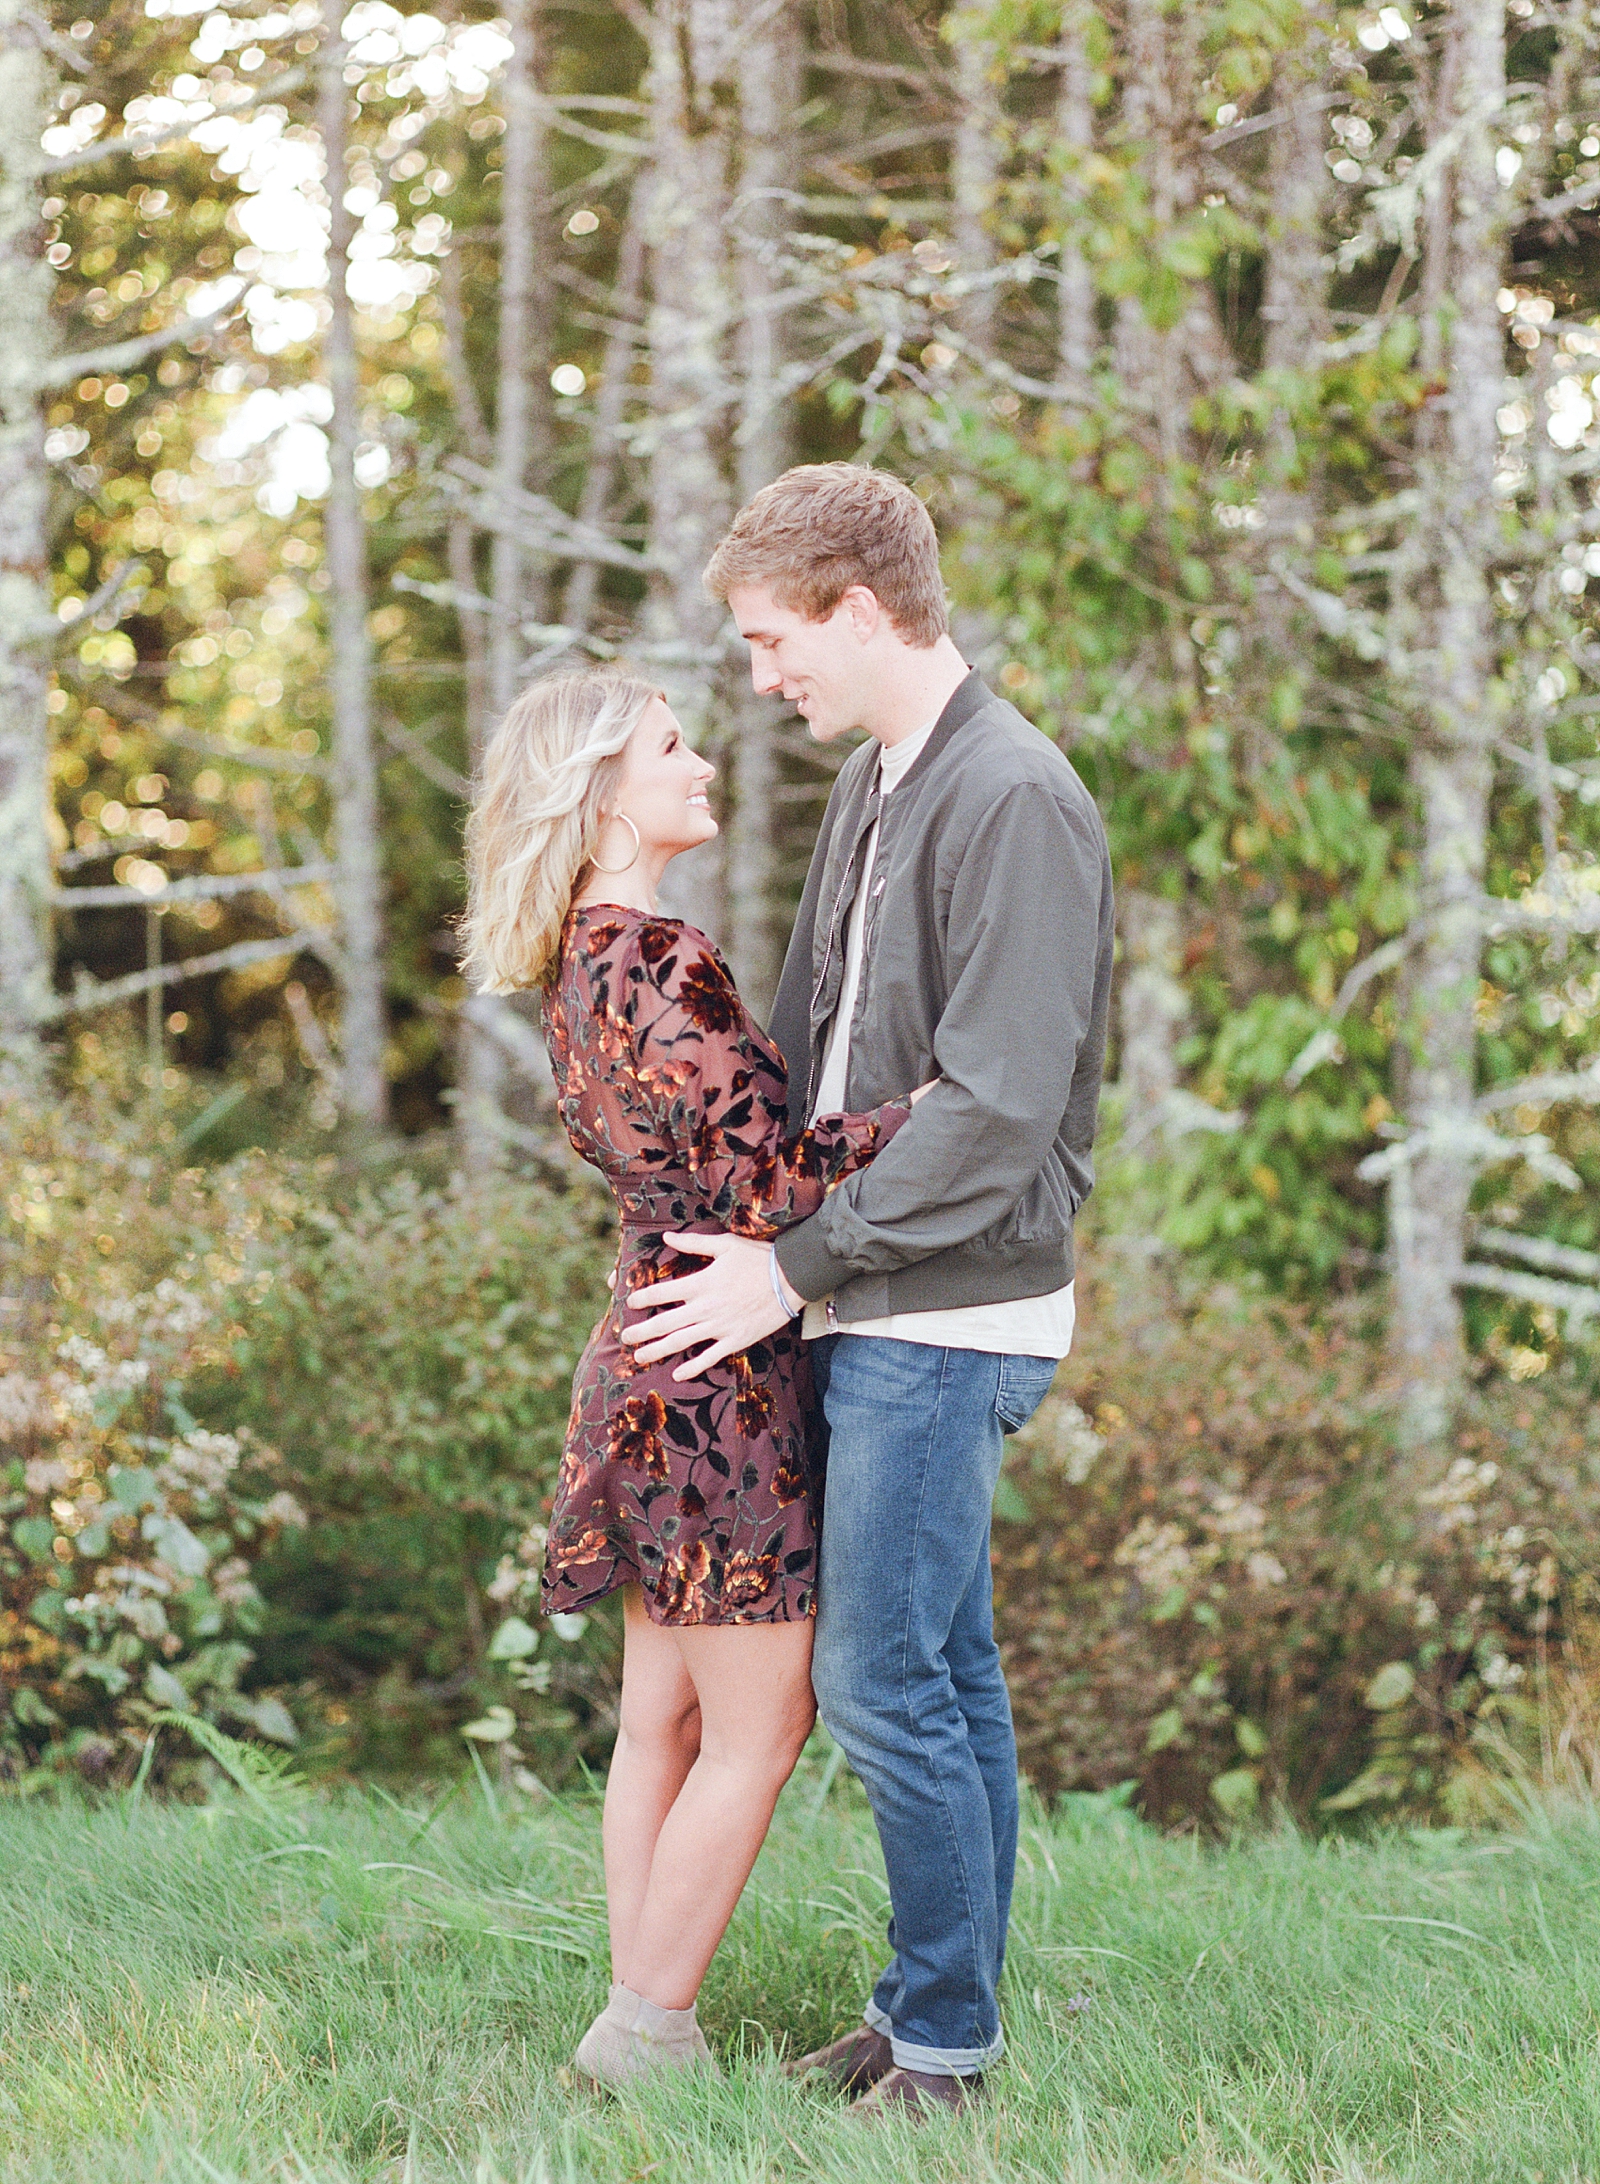 How To Have The Best Engagement Photos Couple Hugging Smiling At Each Other Photo